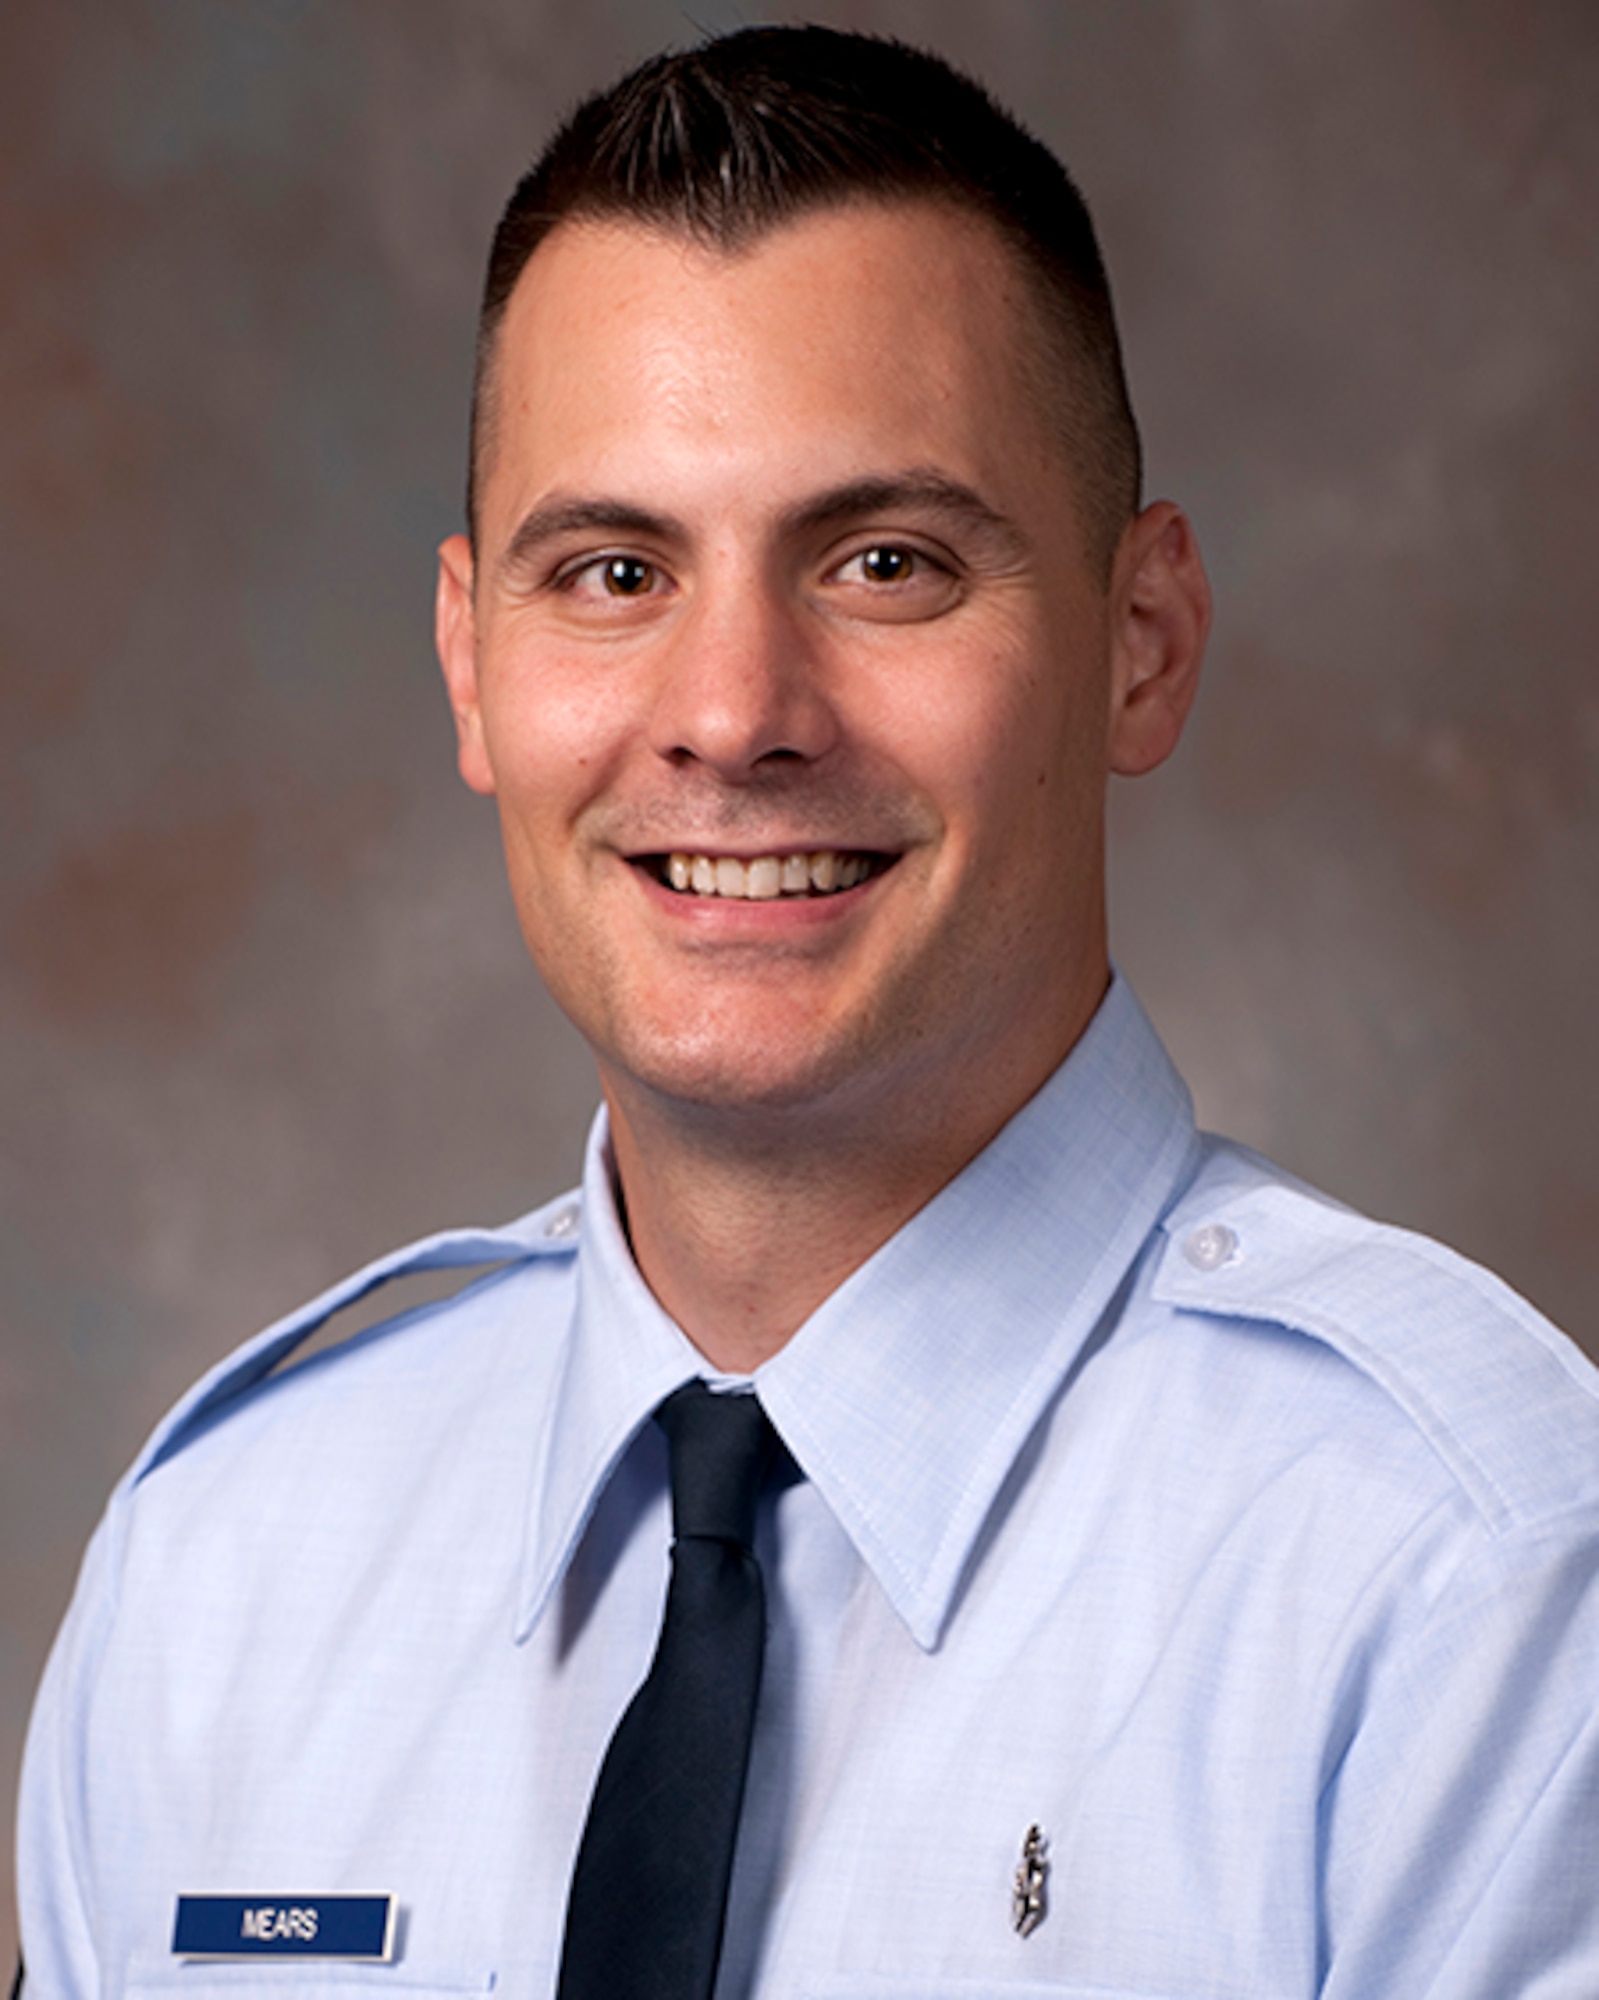 Tech. Sgt. Charles Mears is one of five members of the Air Force inaugural class enrolled in the Enlisted to Medical Degree Preparatory Program. The Enlisted to Medical Degree Preparatory Program is a partnership between the Armed Services and Uniformed Services University. Designed for enlisted service members, the two-year program enables members to remain on active duty status while enrolled as full-time students in preparation for application to medical school. (Courtesy photo)